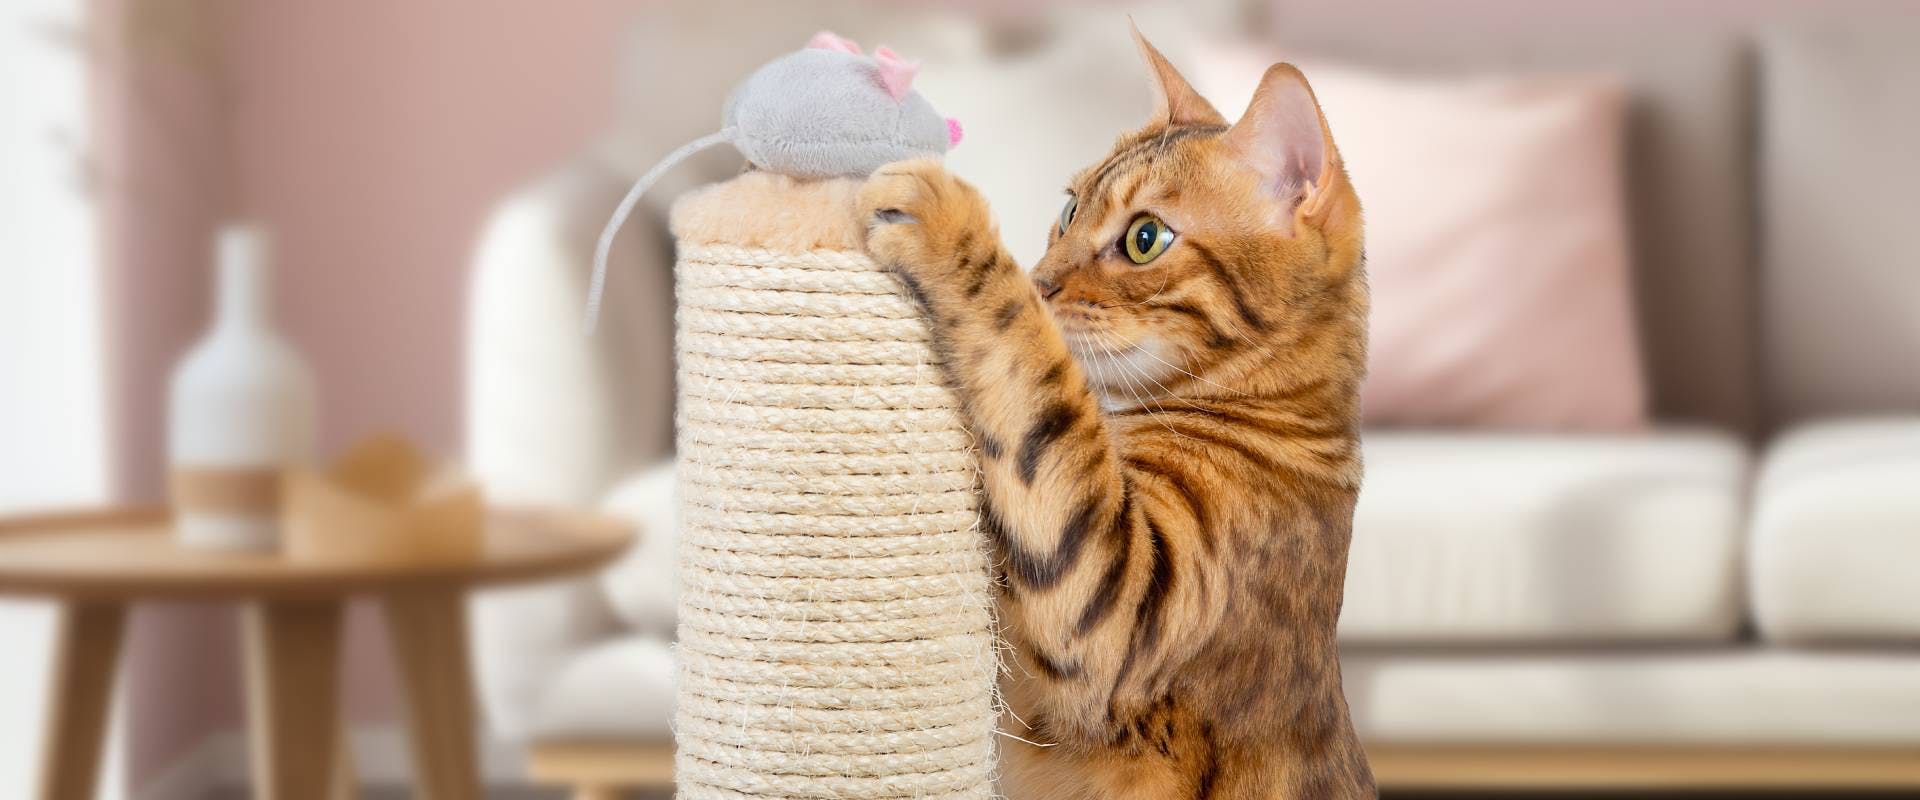 a house cat using a scratching post with a toy mouse on top of it